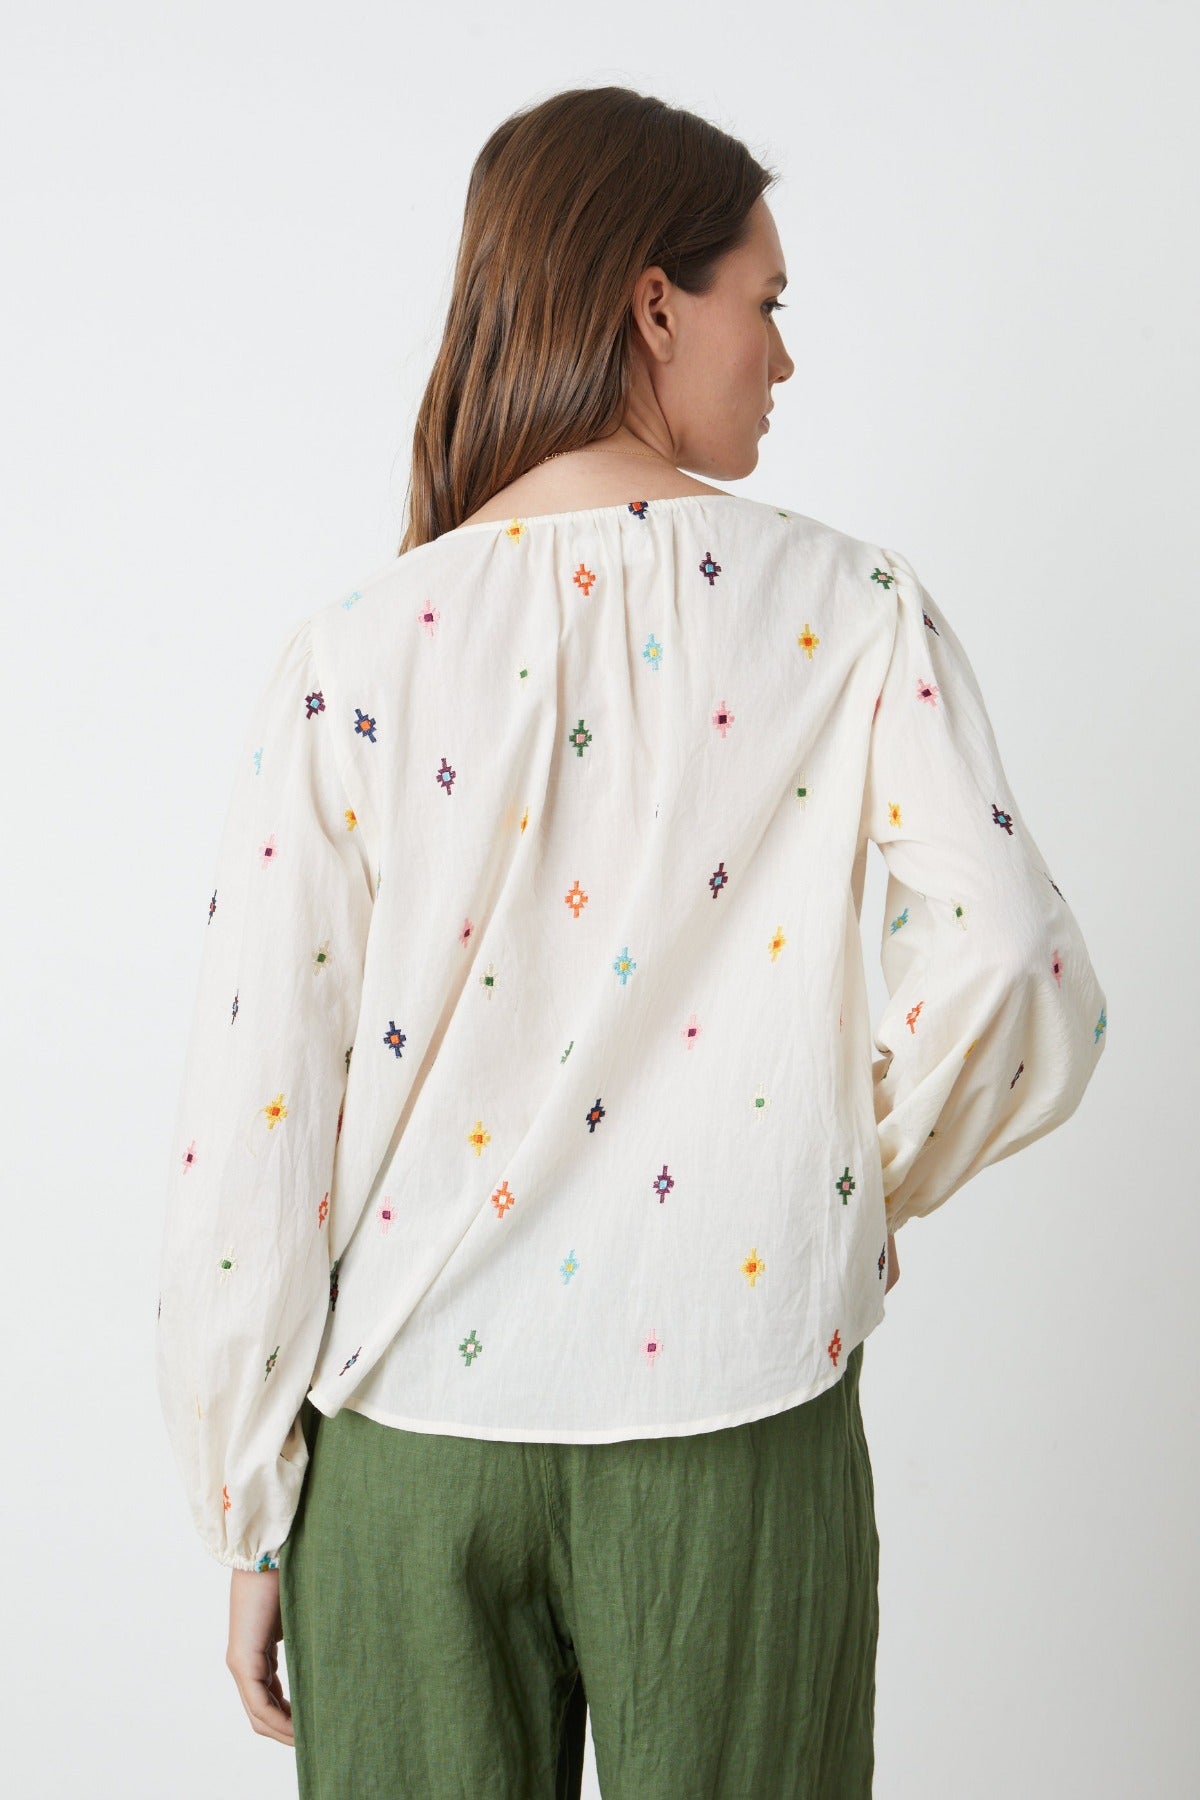 The back view of a woman wearing the Velvet by Graham & Spencer ELIZABETH EMBROIDERED BOHO TOP.-26757374804161